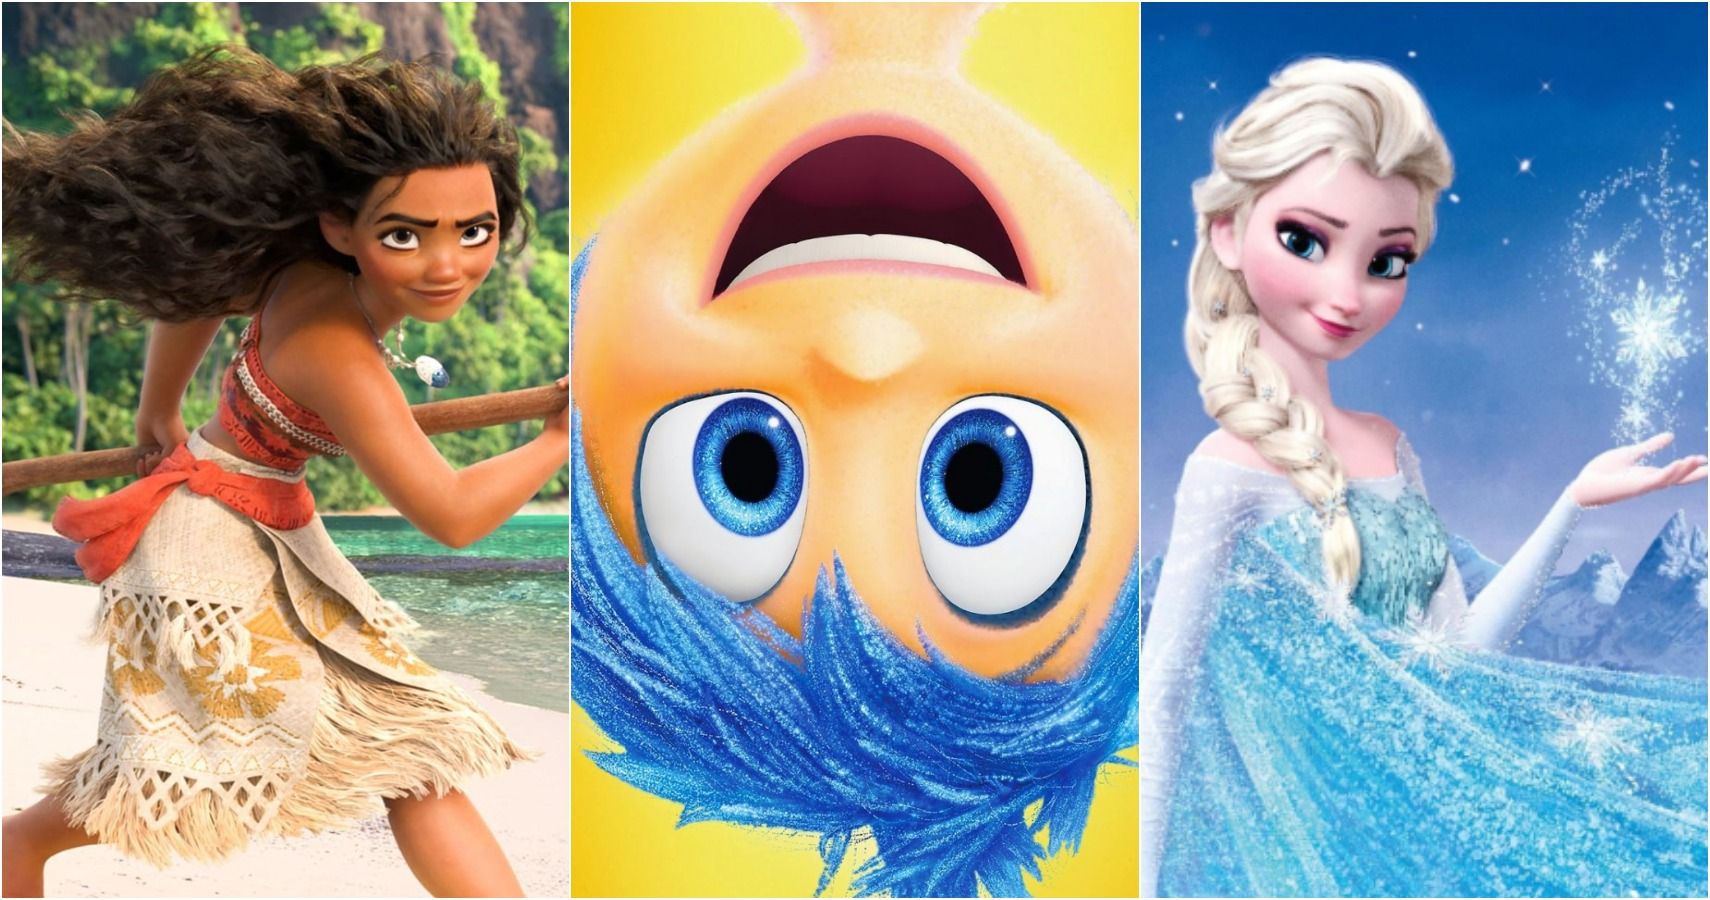 Top 10 Children's Films Featuring Female Protagonists